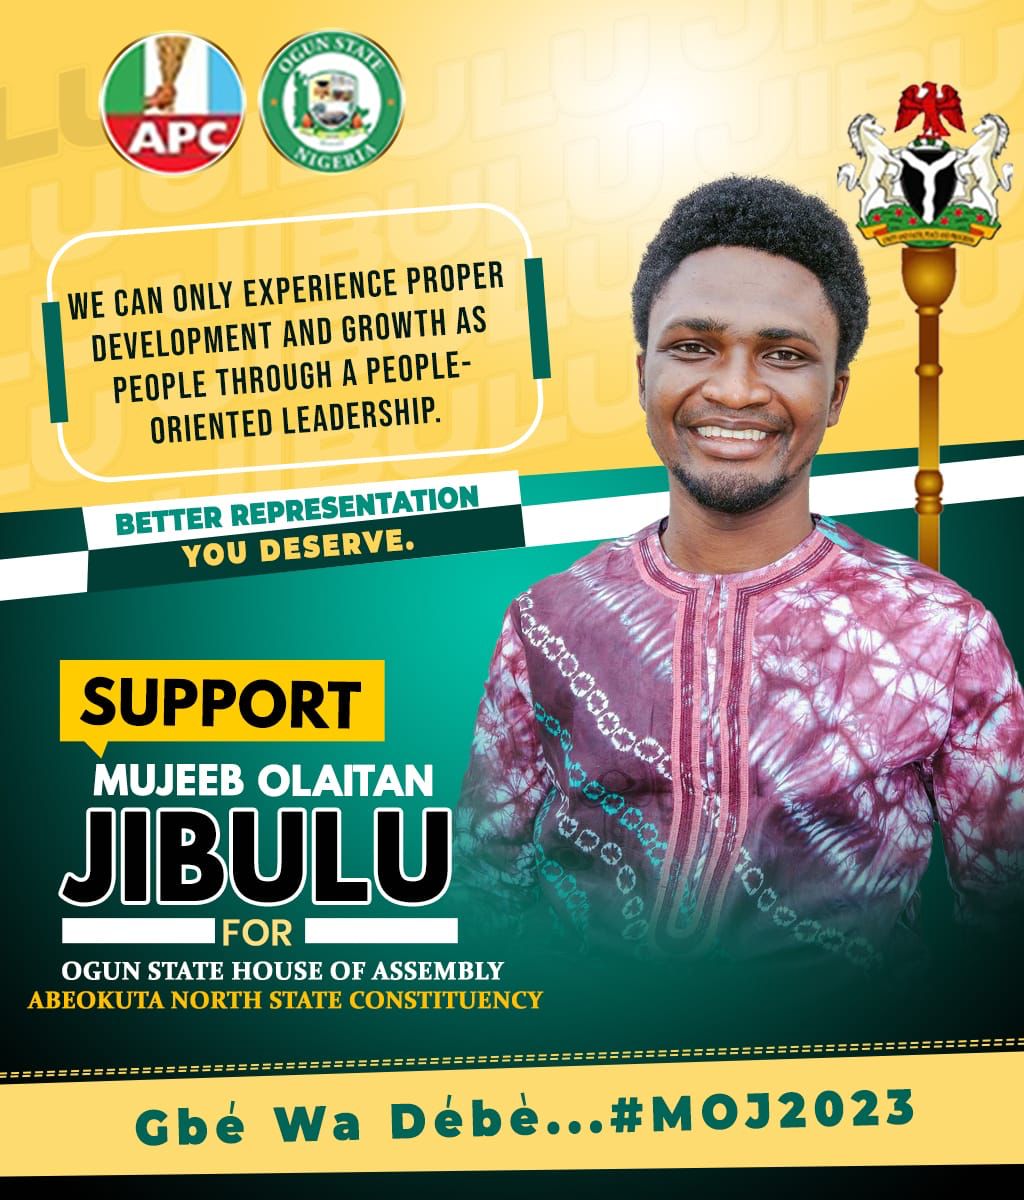 Interview: My passion for helping people with which I founded ‘JibuluCare’ since 2017 pushed me into politics